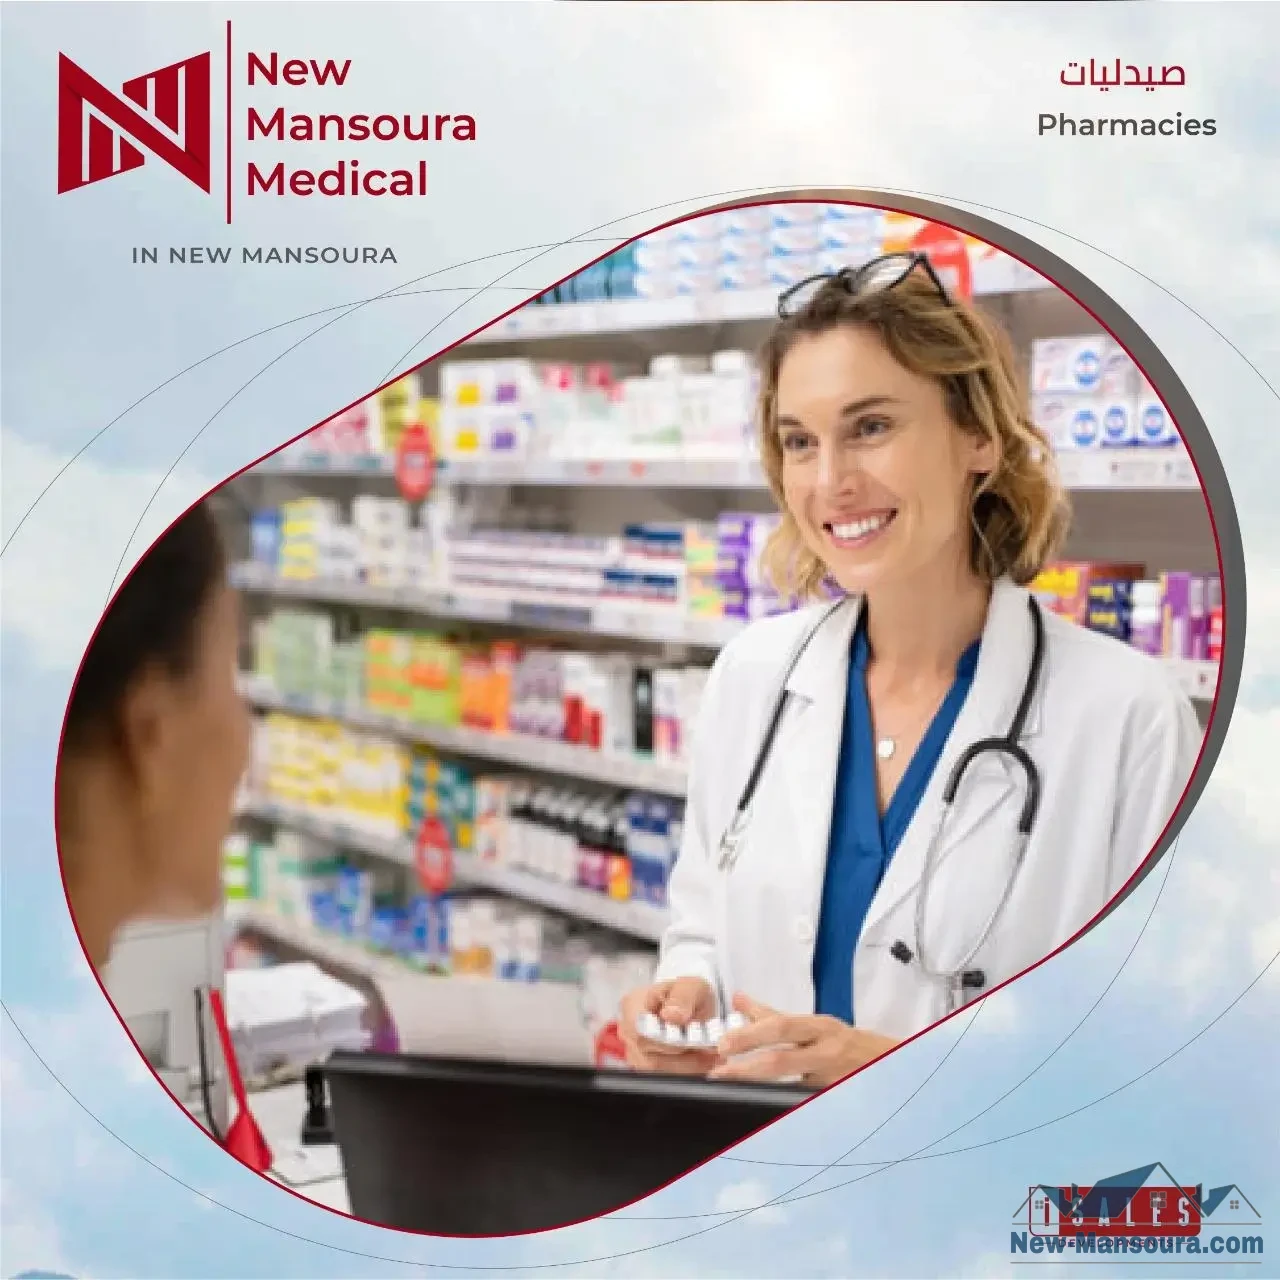 own a medical clinic in the first medical center in the new city of Mansoura, 38m